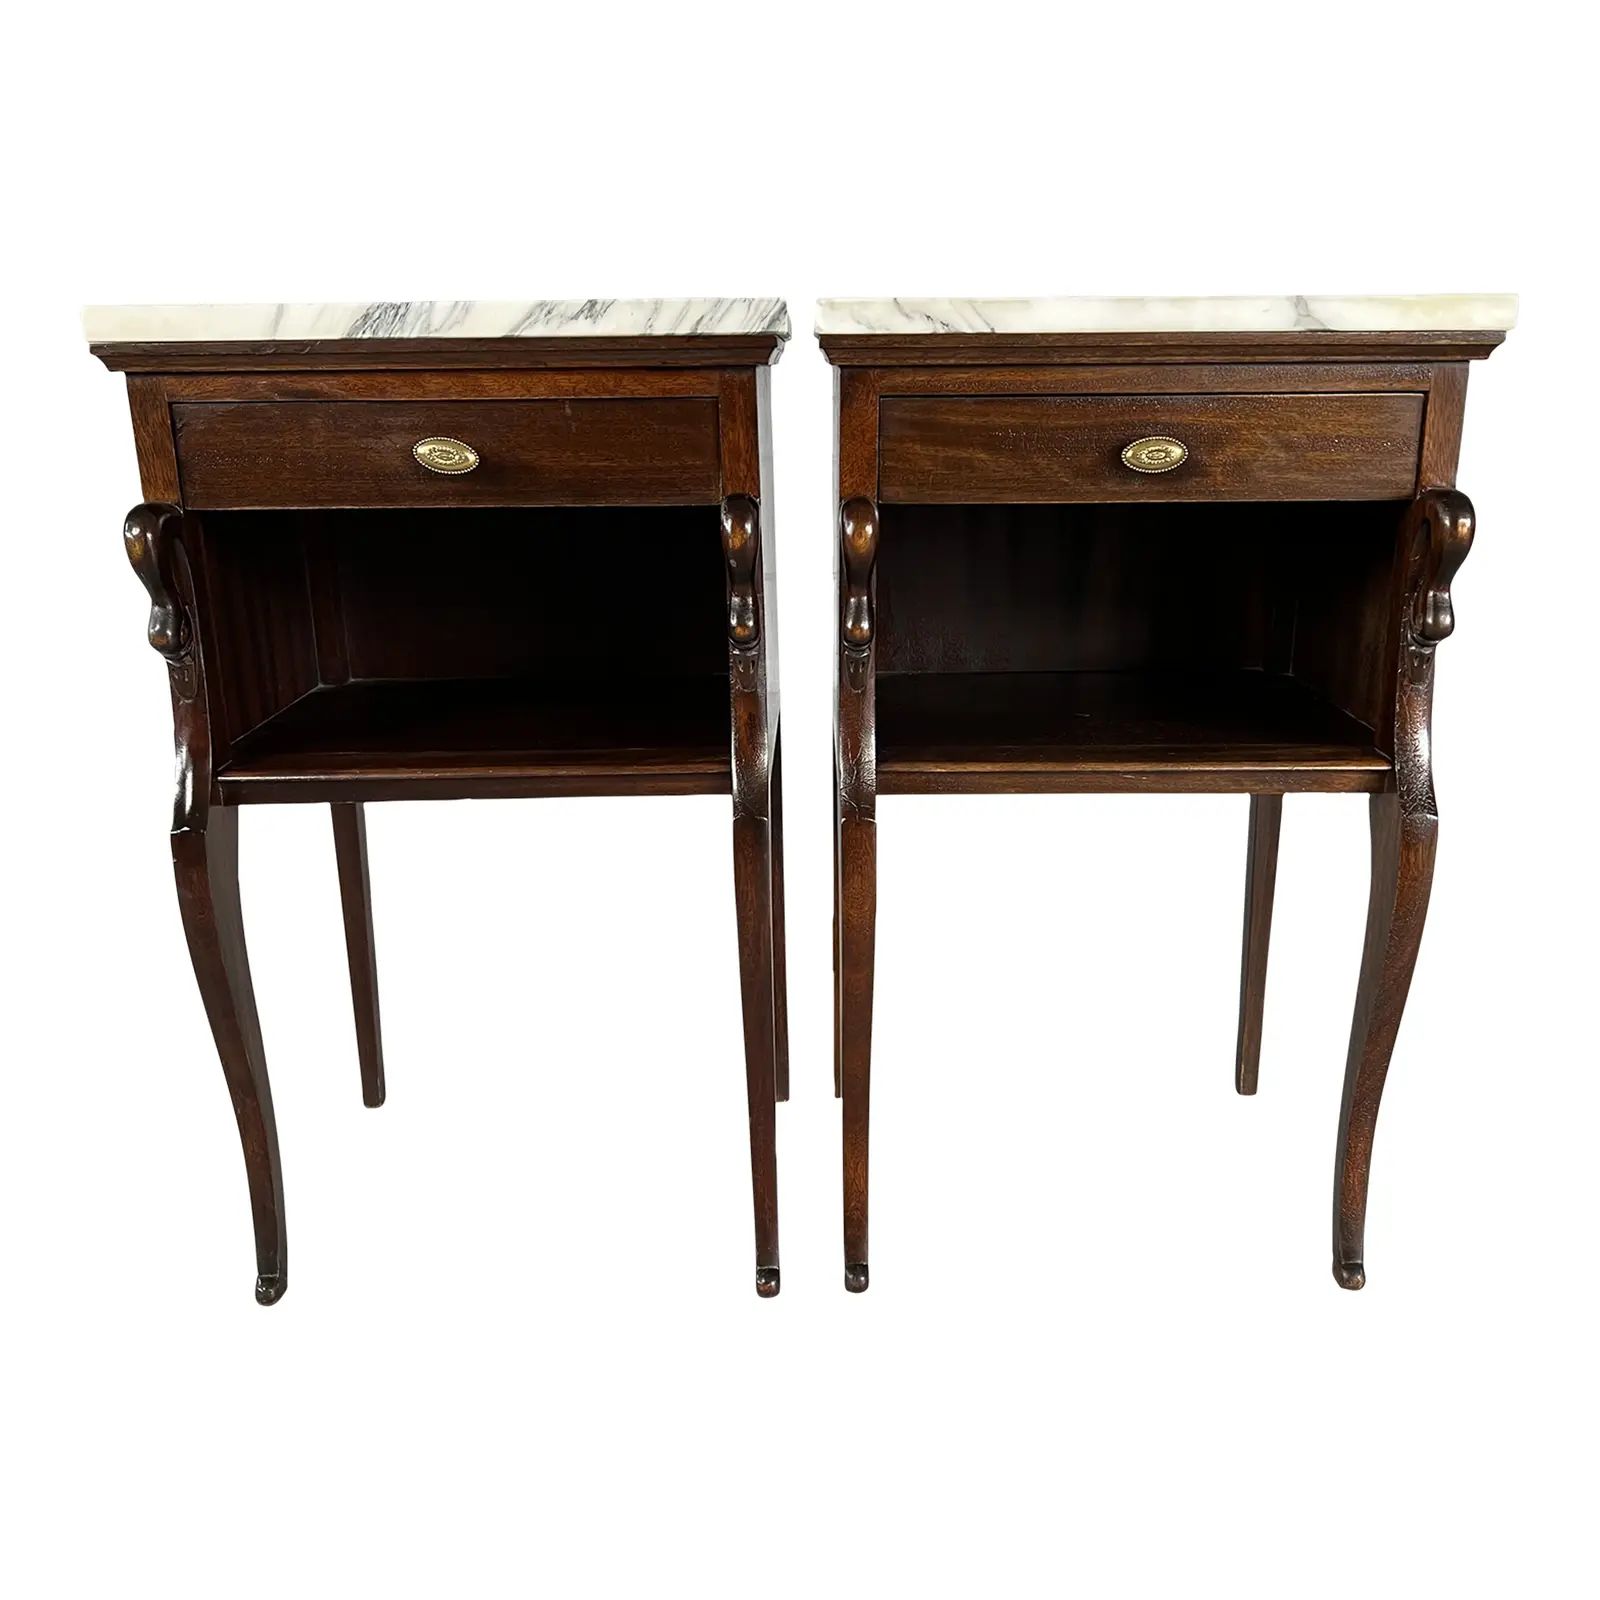 Elegant Pair of Vintage French Empire Style Side Cabinets or Nightstands With White Marble Tops | Chairish